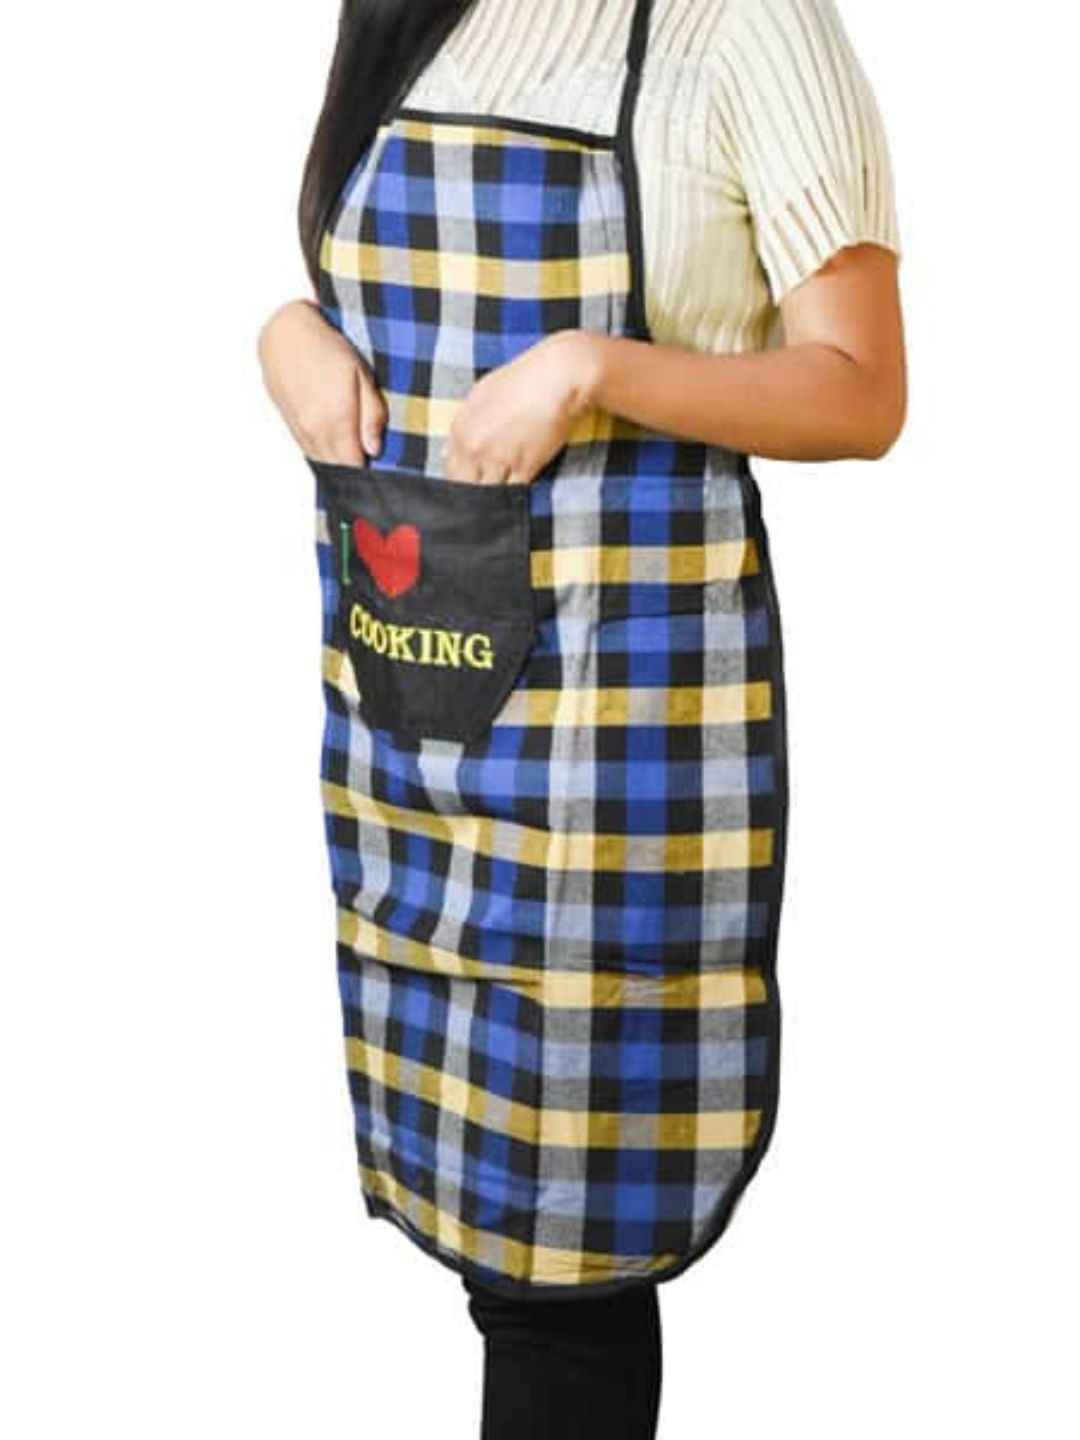 Swarg Kitchen Apron With Front Pocket